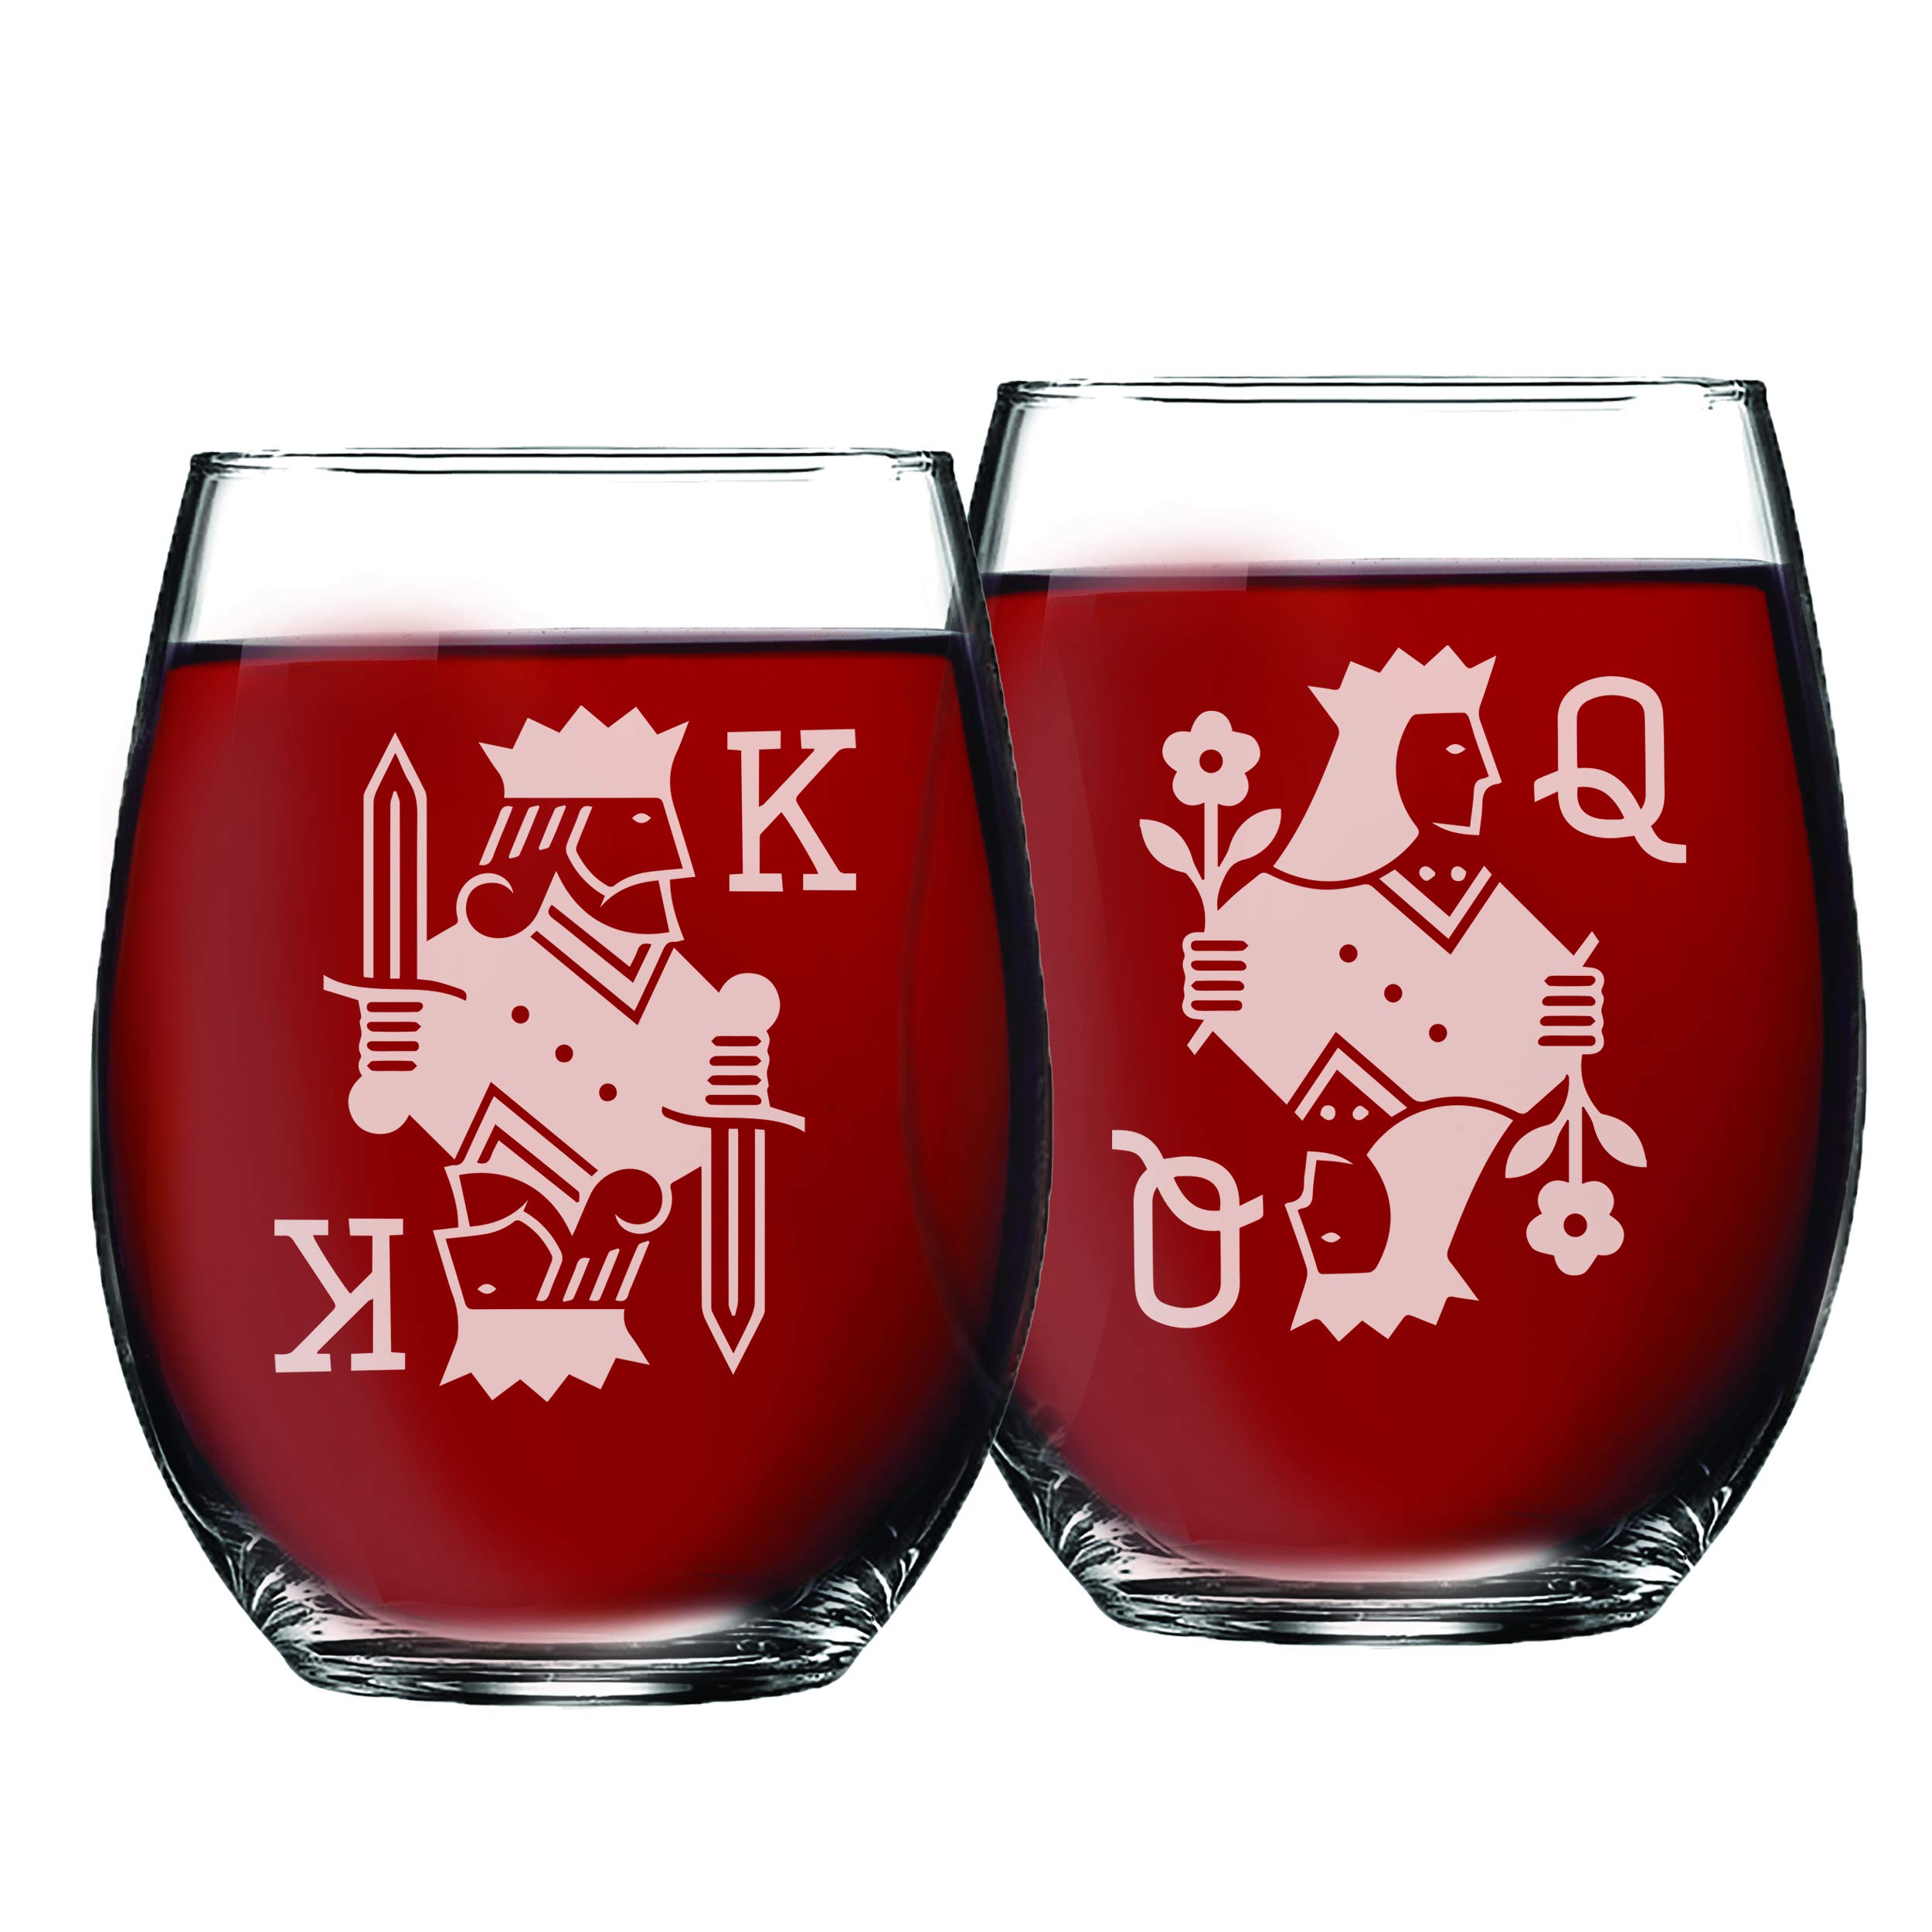 My Personal Memories King and Queen Stemless Wine Glasses Set for Wedding, Anniversary, and Couples